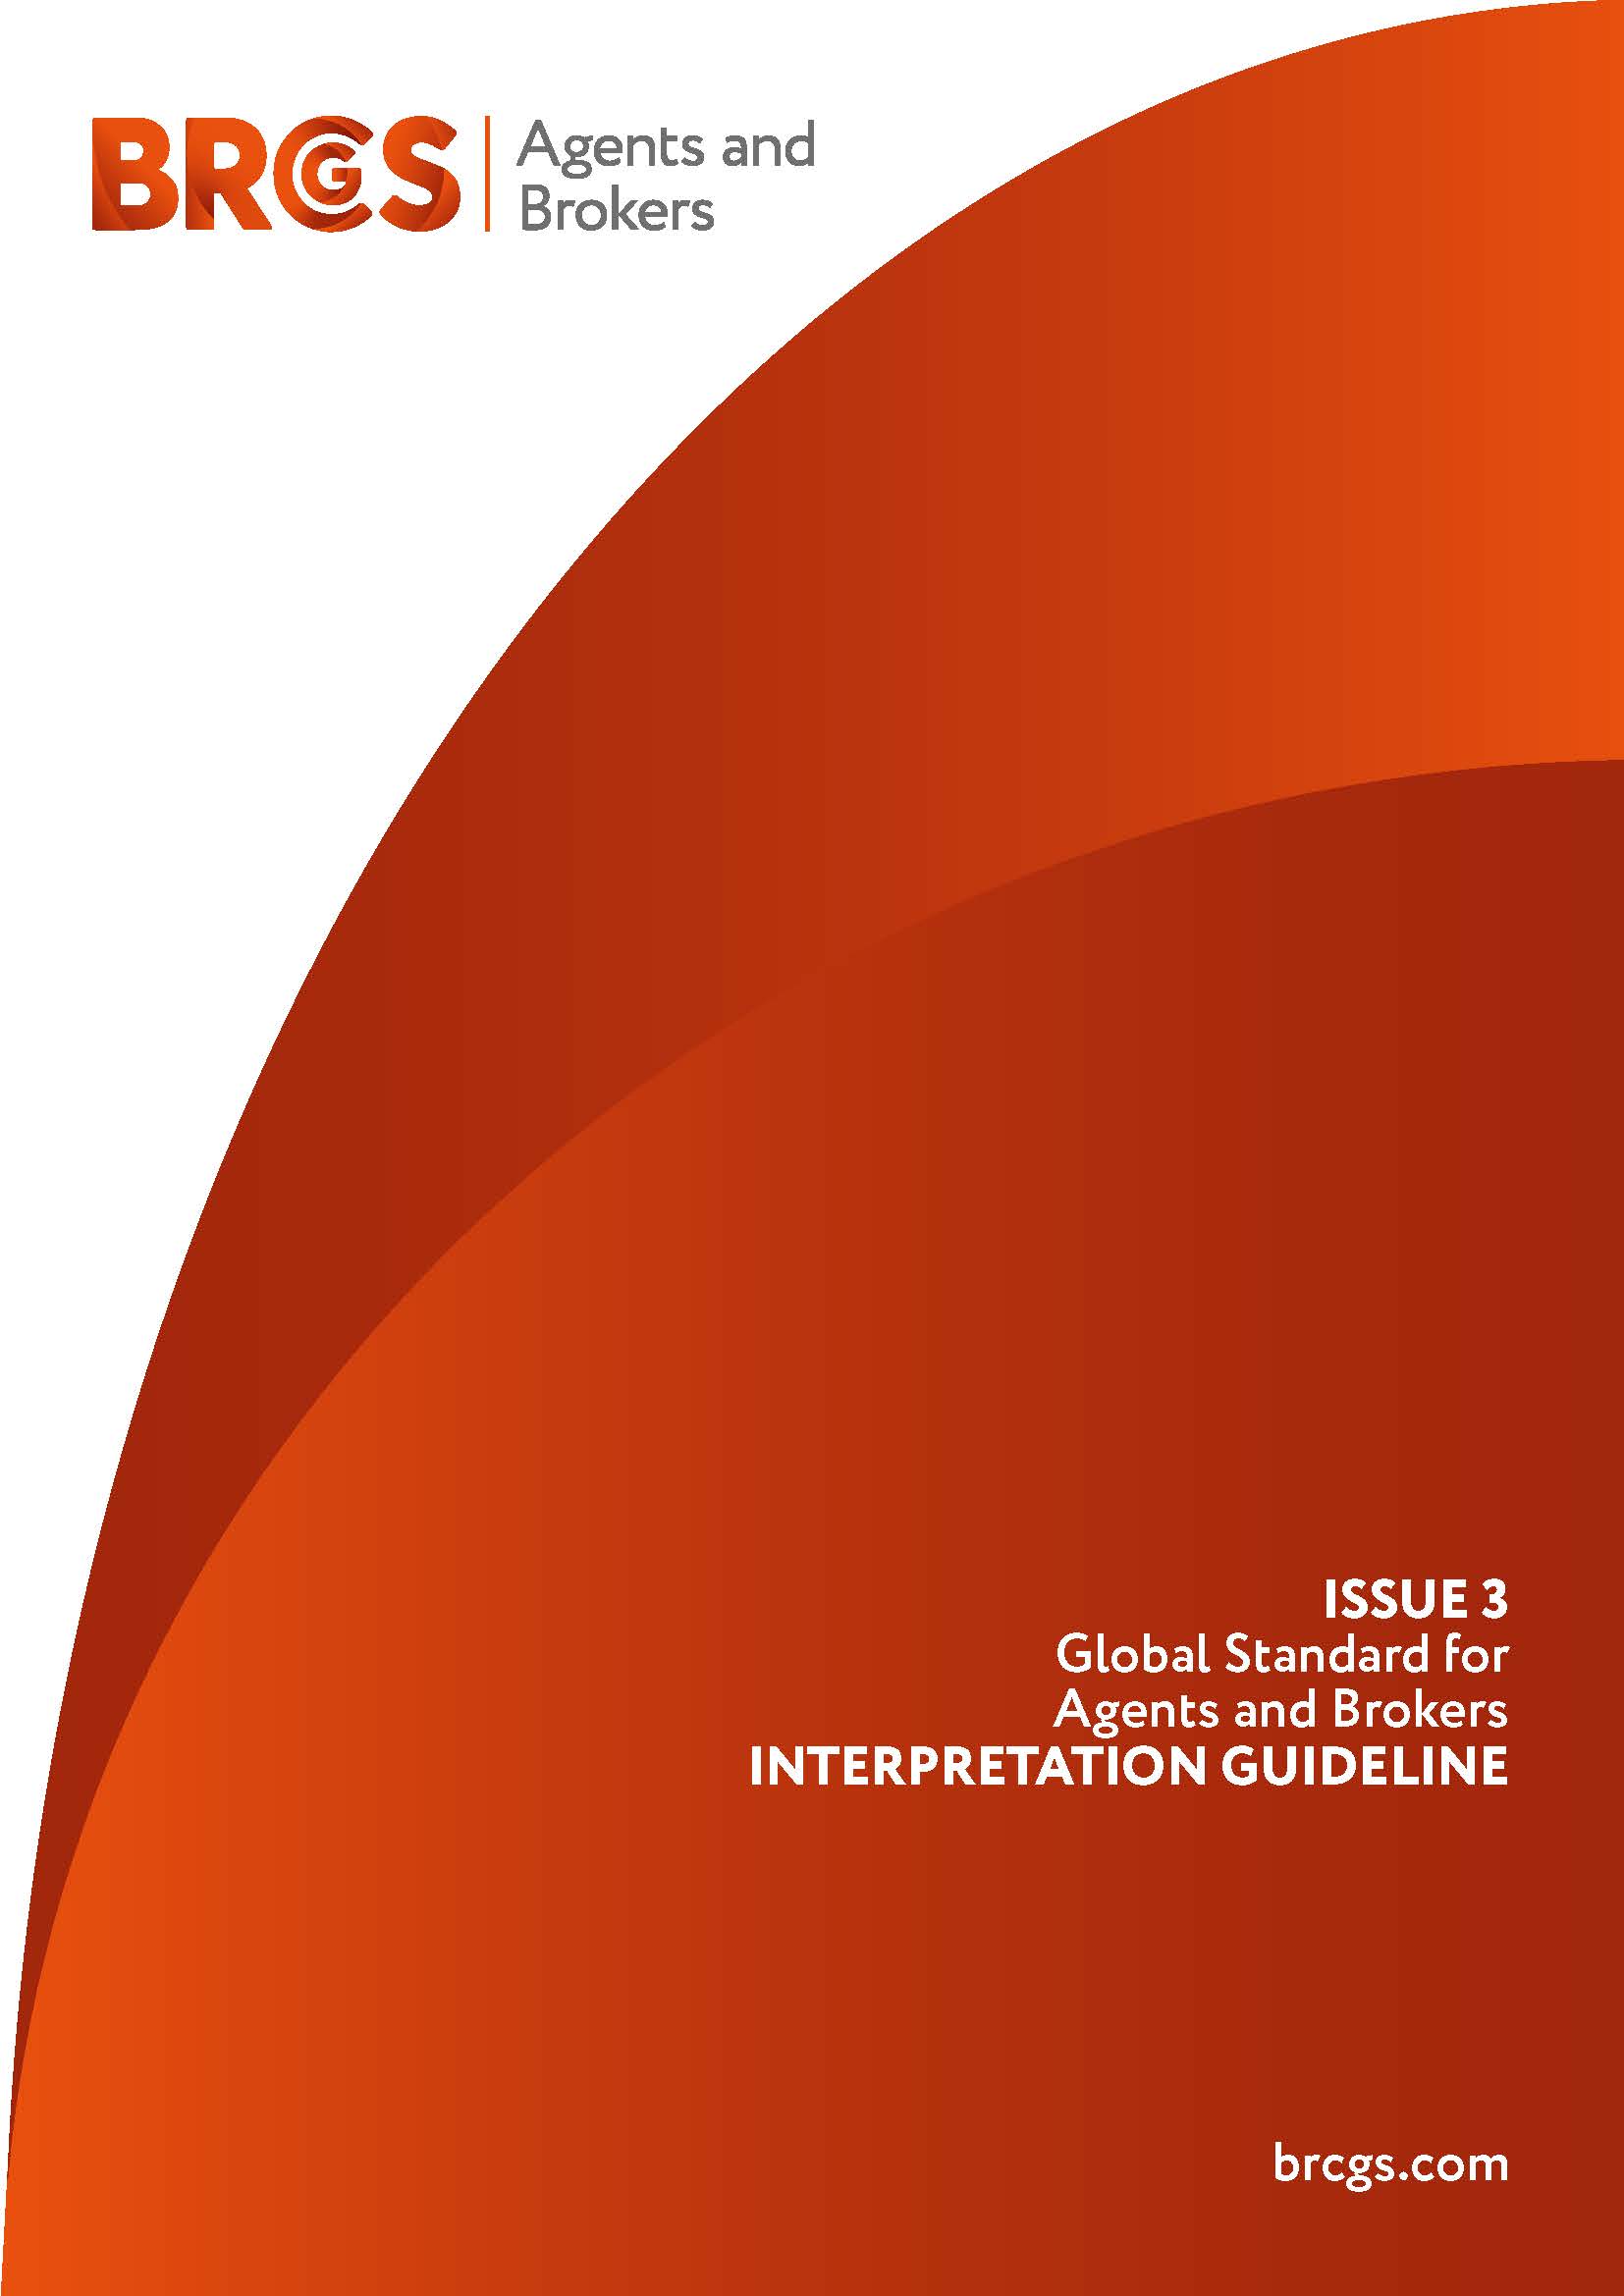 Global Standards for Agents and Brokers (Issue 3) Interpretation Guideline